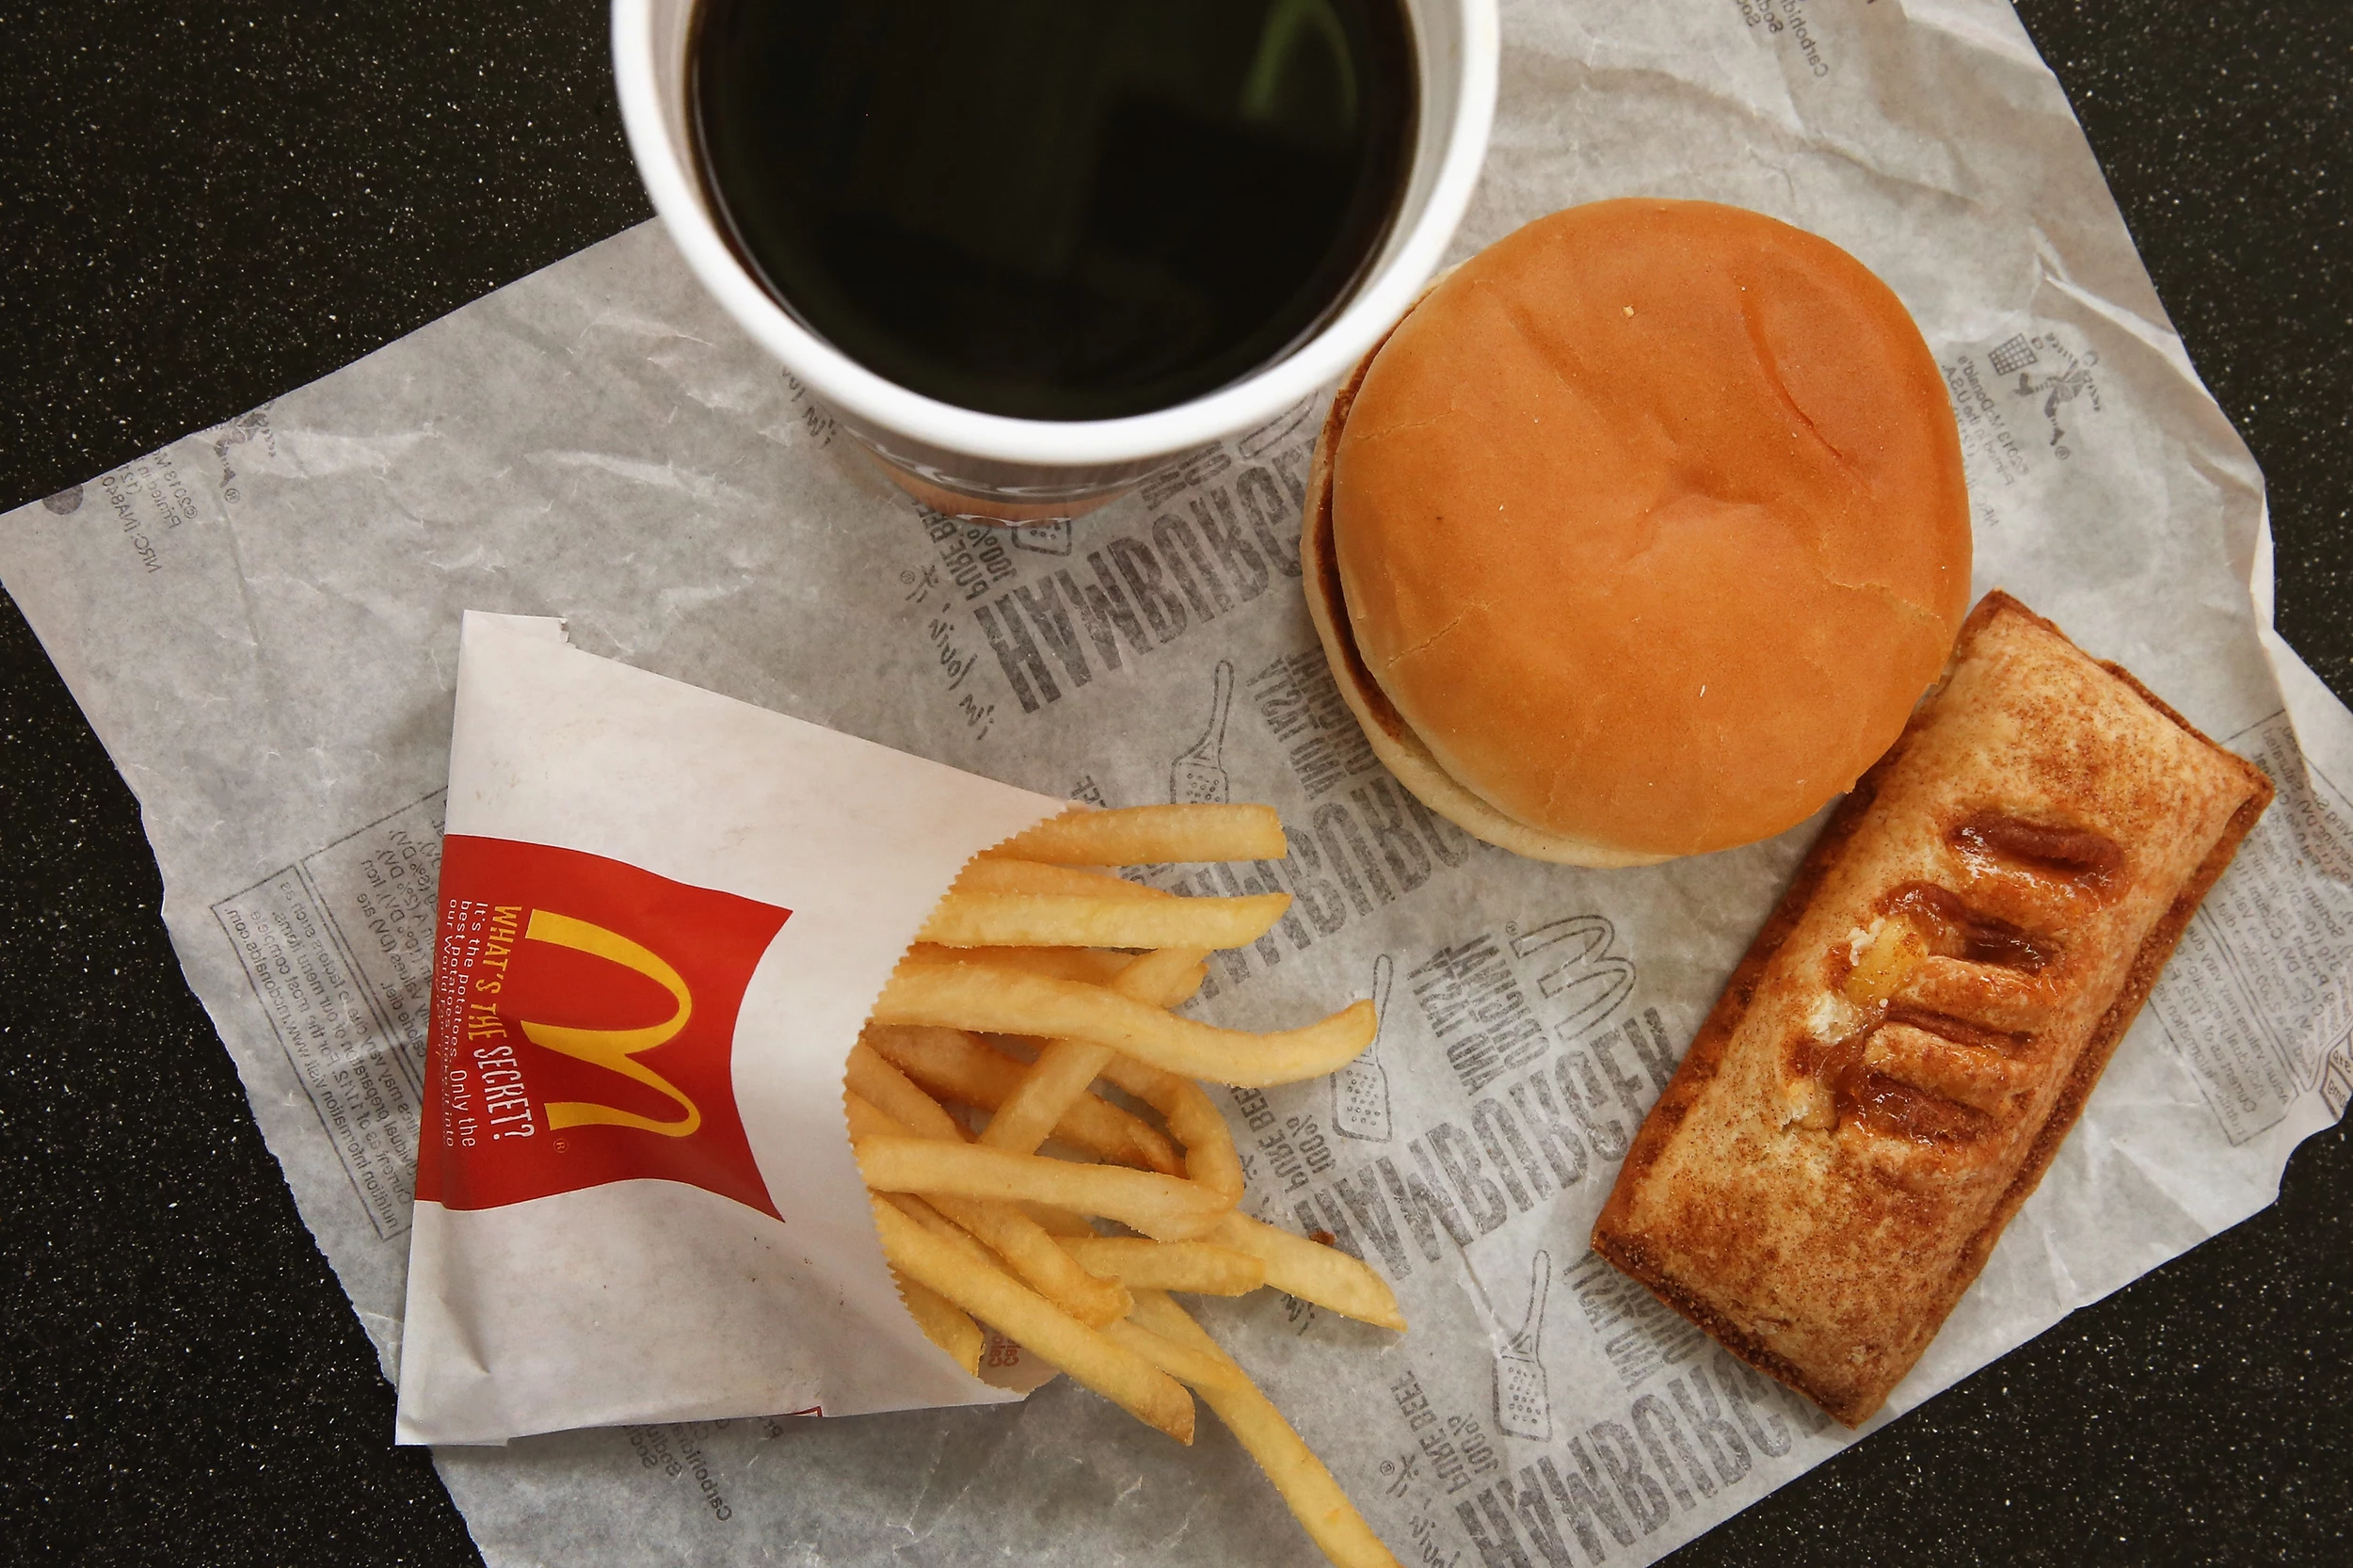 These Are the Best Dollar Menu Items in America